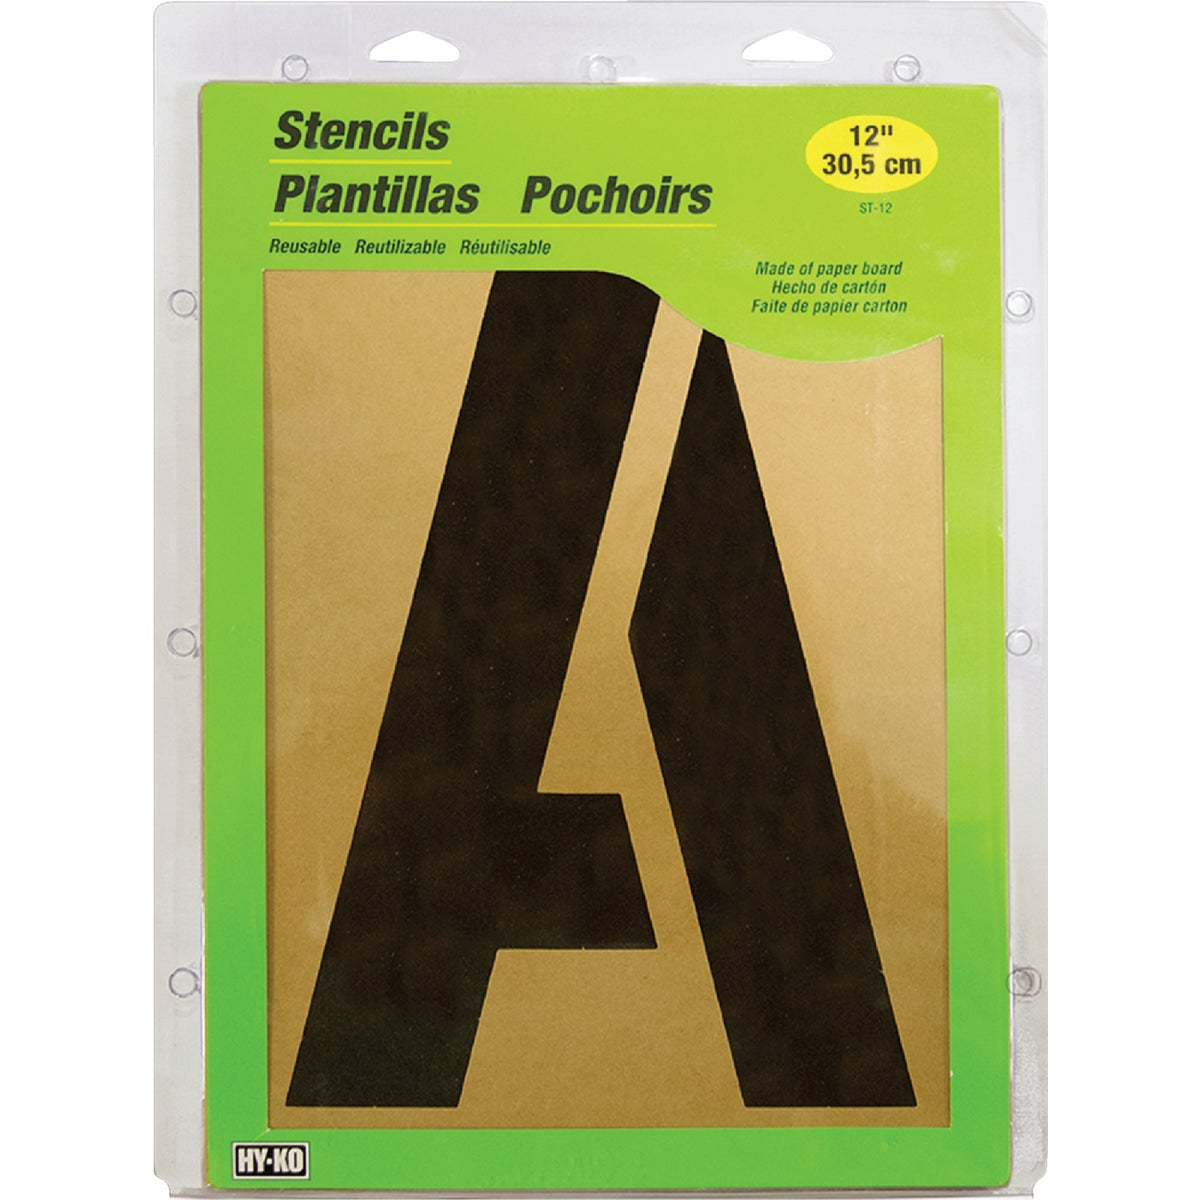 Item 970905, 12" stencils are made of paper board and are reusable.